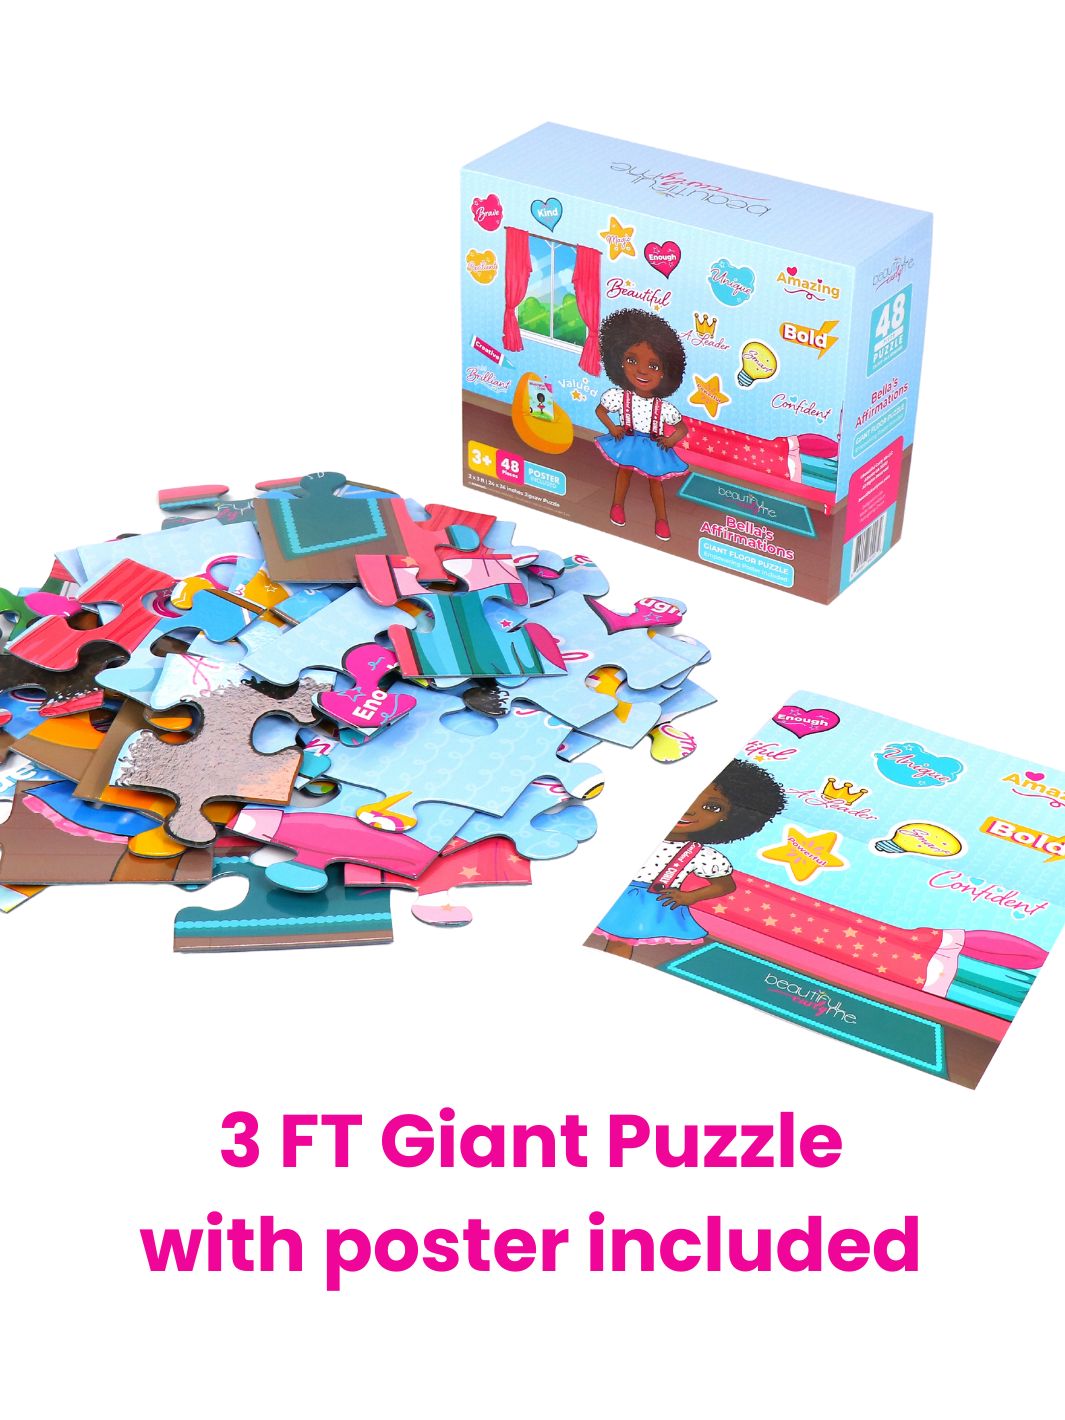 Bella's Affirmations 3 foot Giant 48-piece Floor Jigsaw Puzzle & Poster